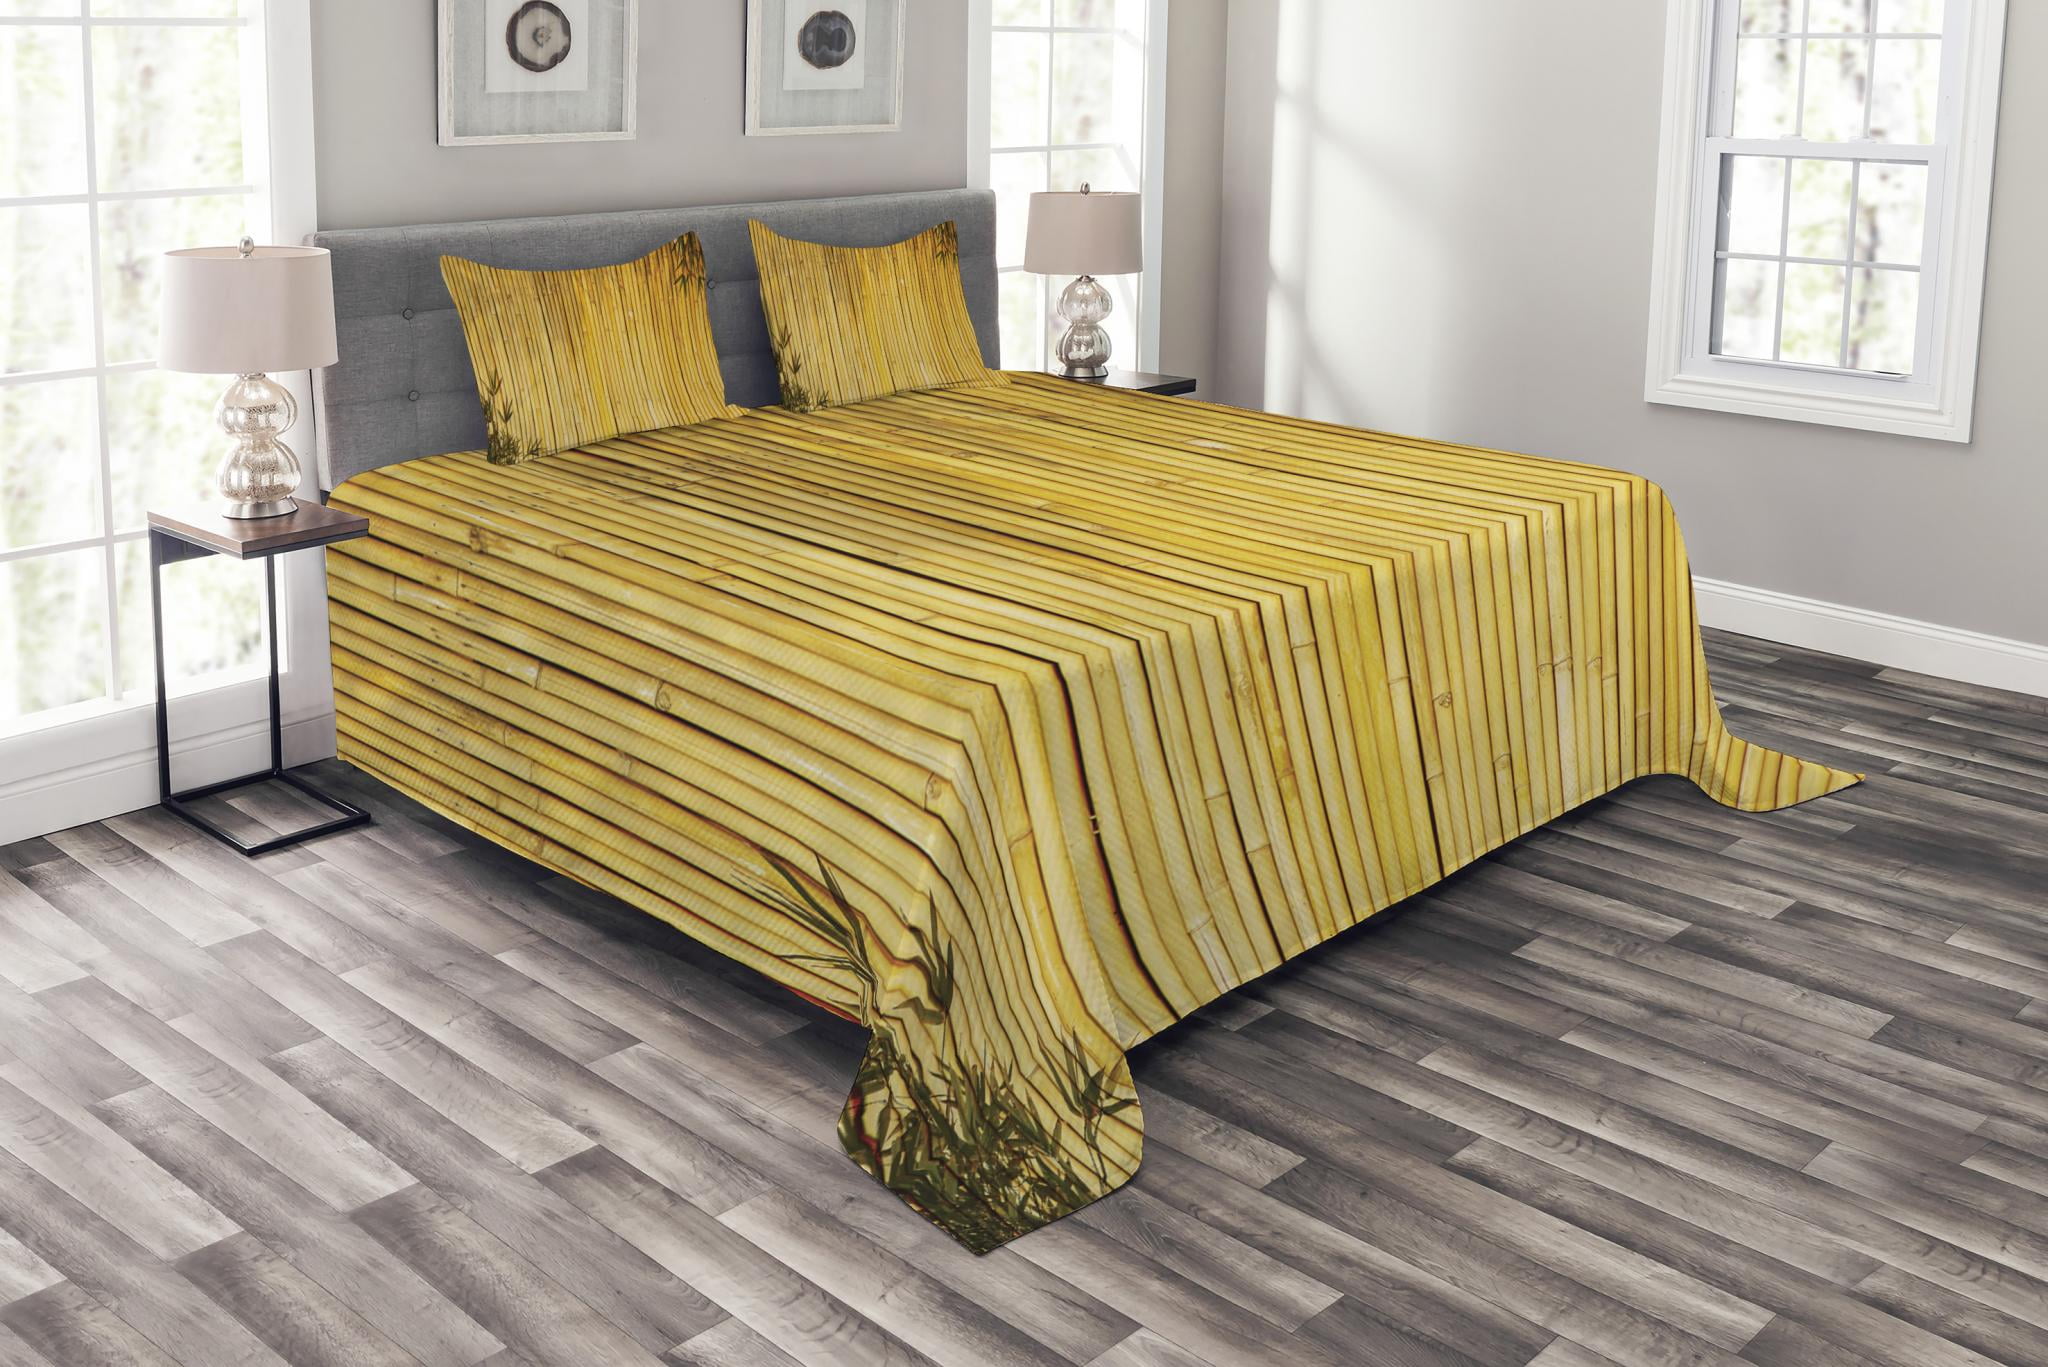 Bamboo Bedspread Set Queen Size, Laminate Flooring From Sam 8217 S Club 7